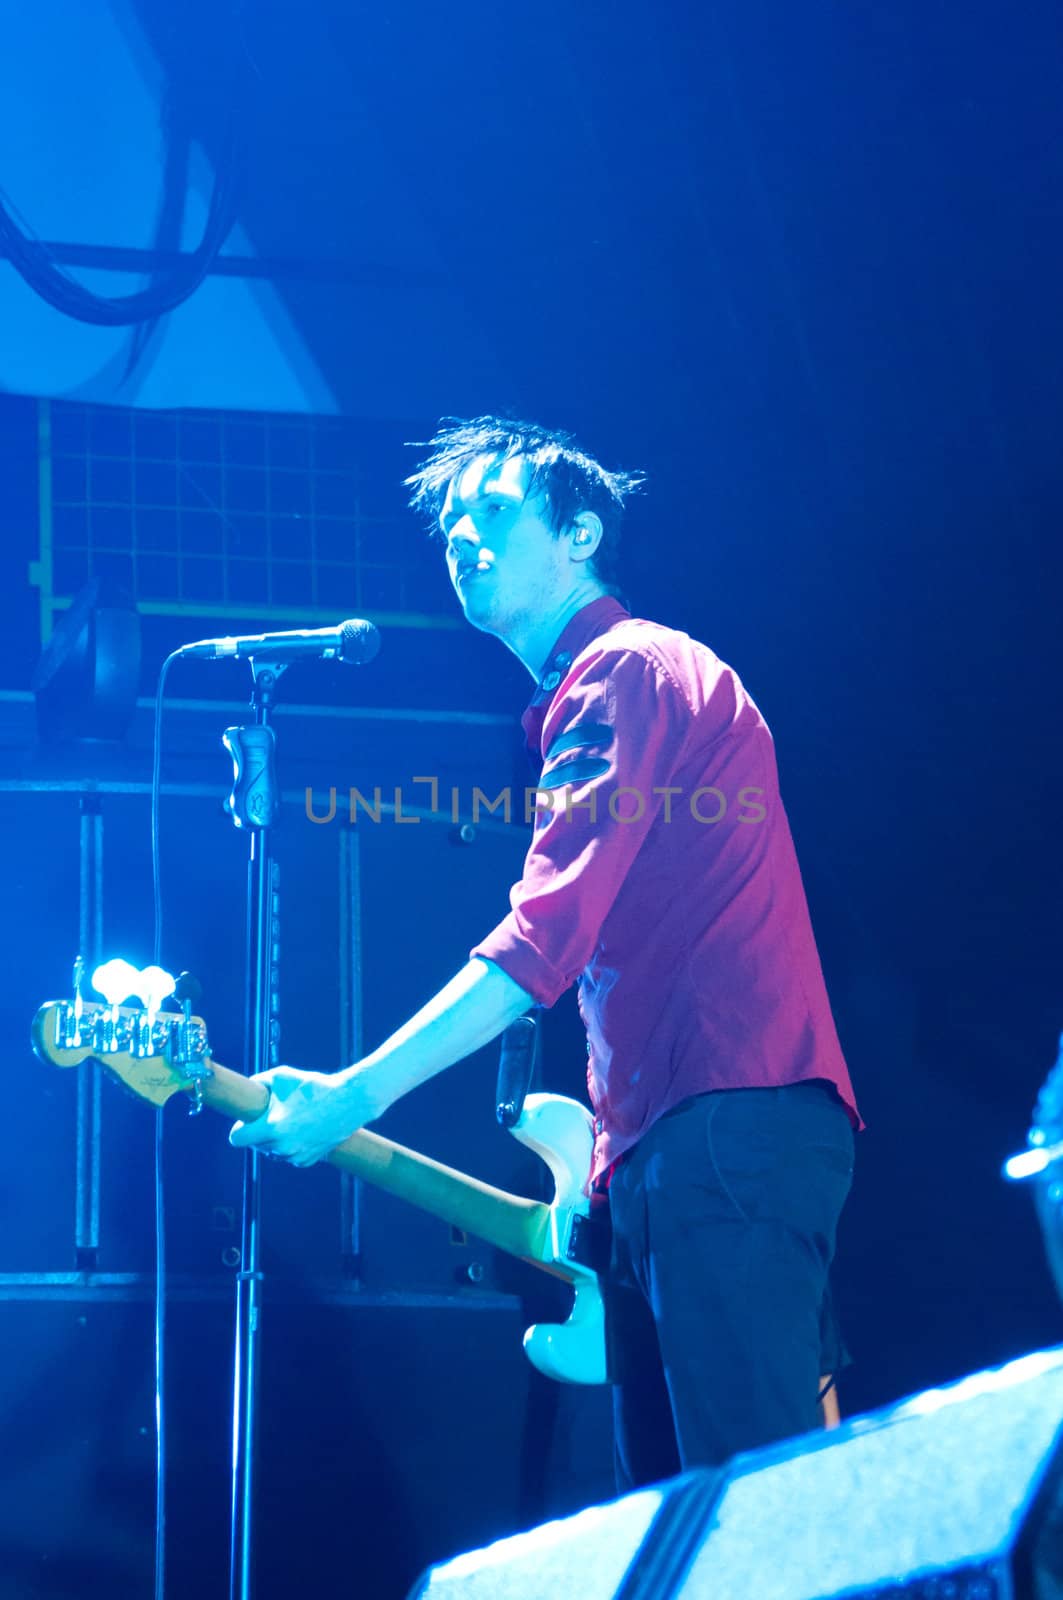 Jason McCaslin. Sum 41 concert at Arena Moscow. 
Jul 25, 2012 - Arena Moscow, Moscow, Russia